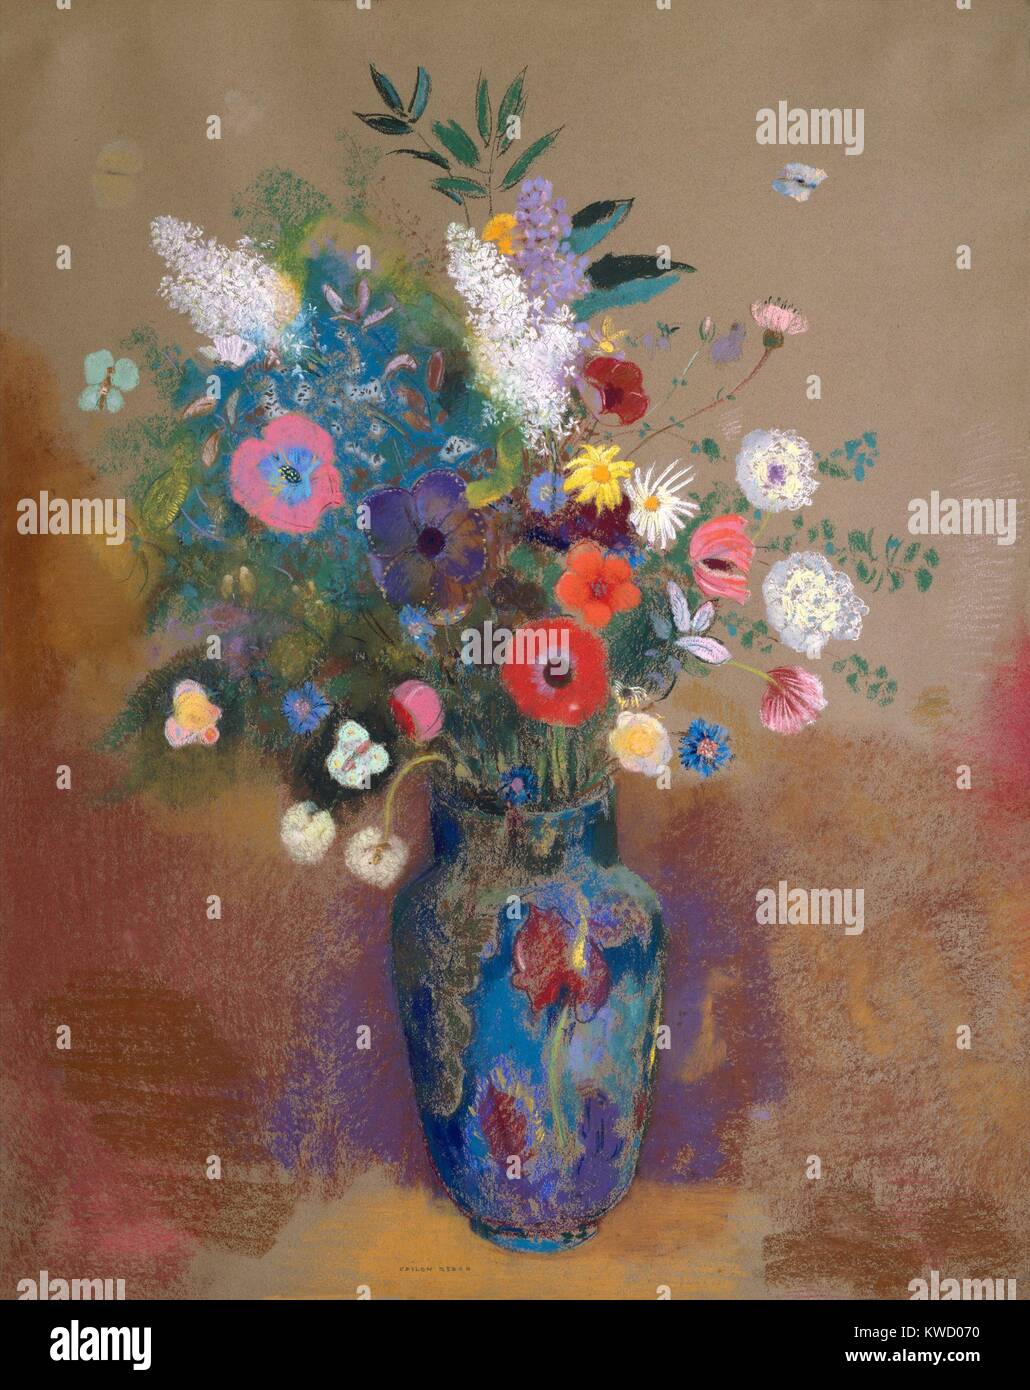 Bouquet of Flowers, by Odilon Redon, 1905, French Symbolist drawing, pastel on paper. Created when the artist was 65 years old, this still life combines a variety flowers in a vase in an undefined space (BSLOC 2017 5 134) Stock Photo